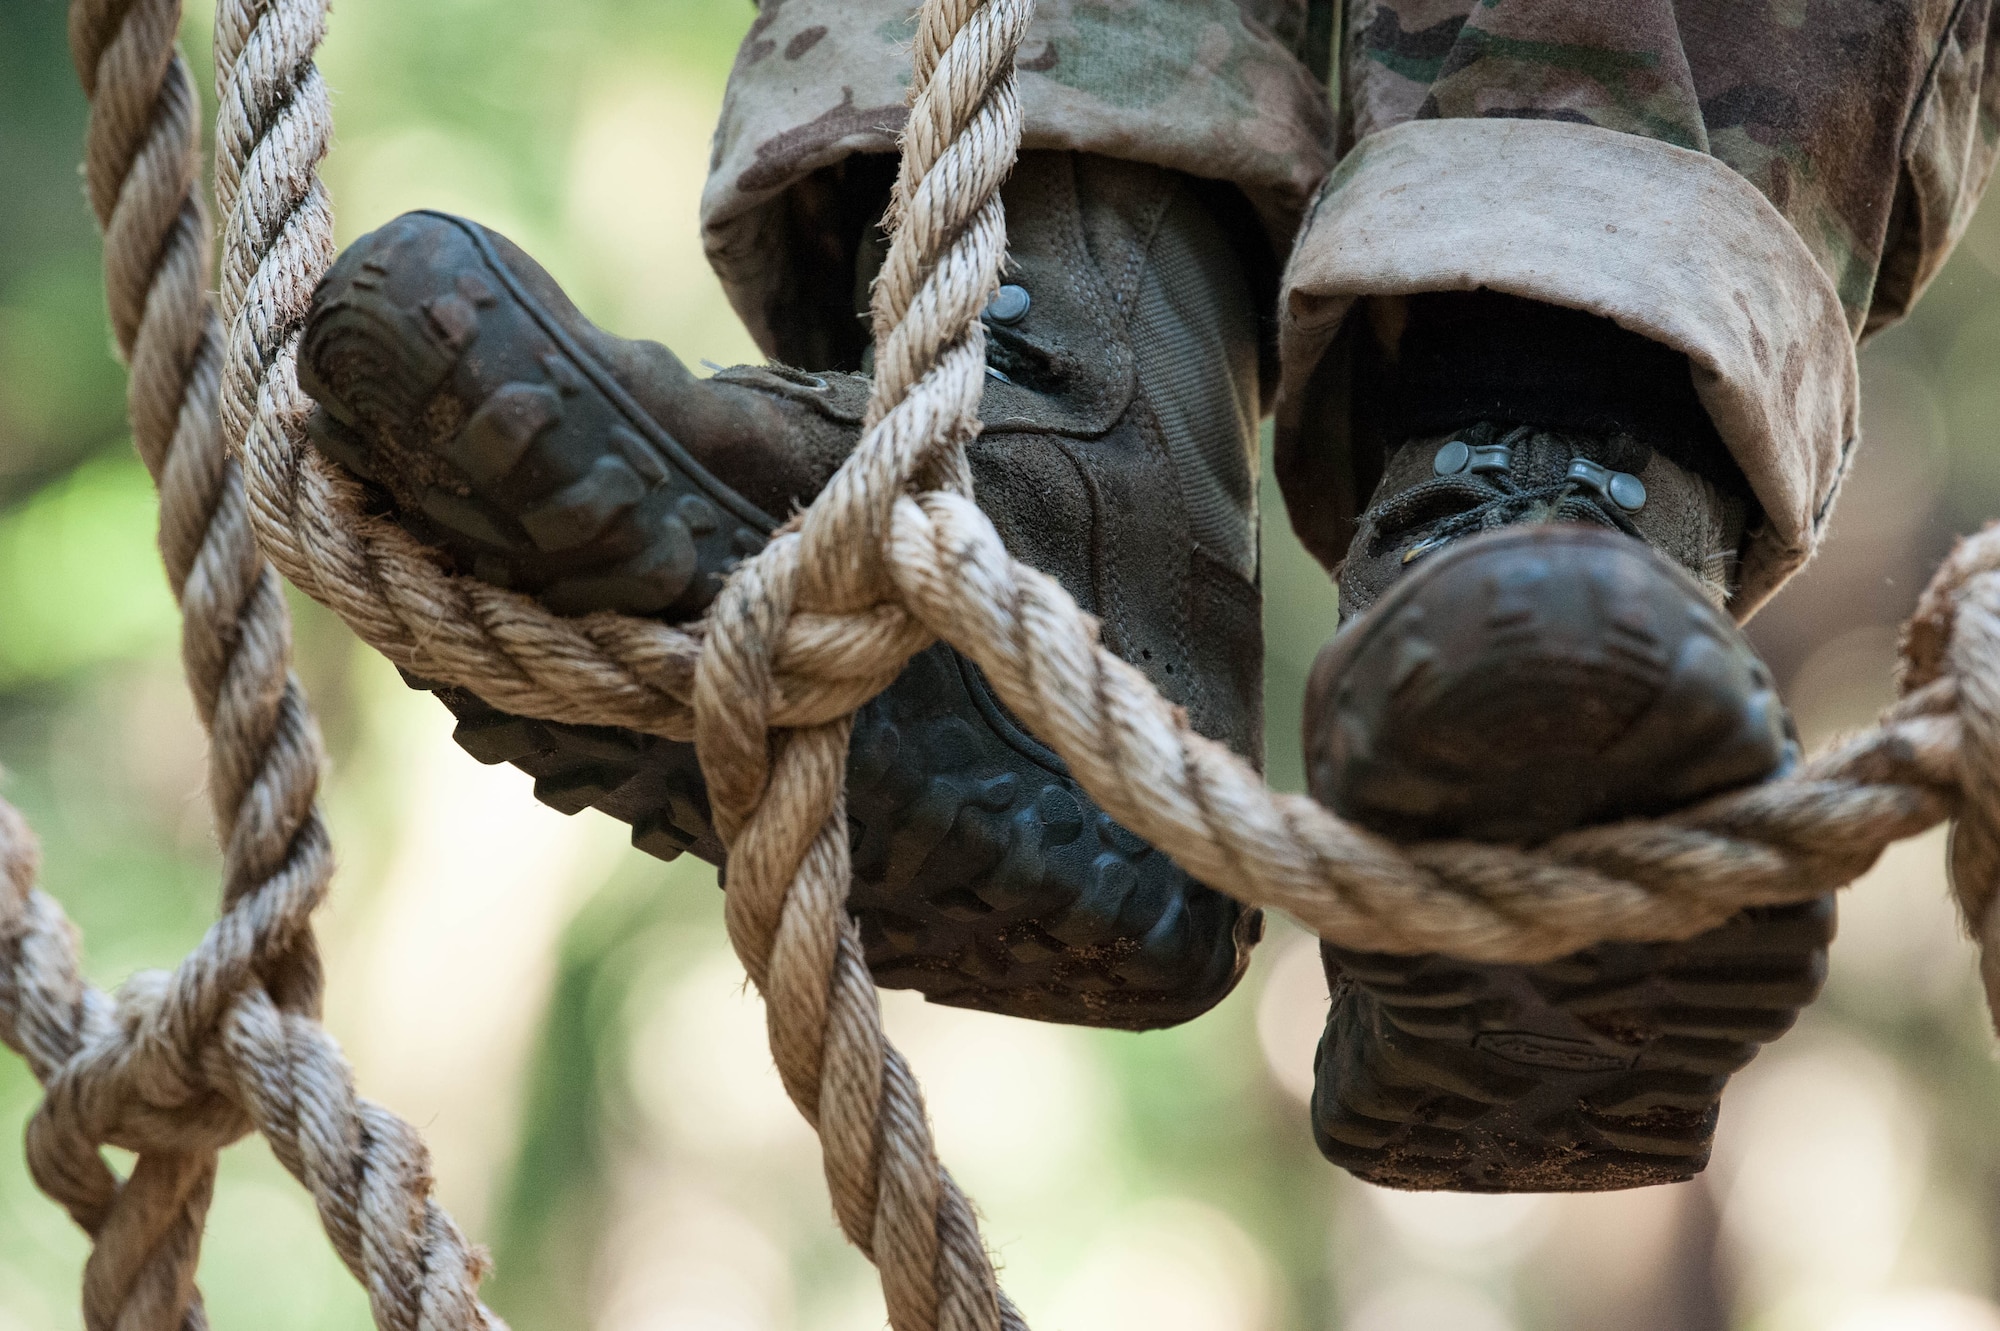 A Ranger Assessment Course student climbs down a rope ladder during the obstacle course phase of RAC near Schofield Barracks, Oahu, Hawaii, May 20, 2019. The purpose of the 19-day course is to prepare, assess and evaluate Air Force candidates for Army Ranger School. The Airmen who pass the RAC gain more than a ticket into Ranger School and knowledge on Army tactics – they learn to lead. (U.S. Air Force photo by Staff Sgt. Hailey Haux)